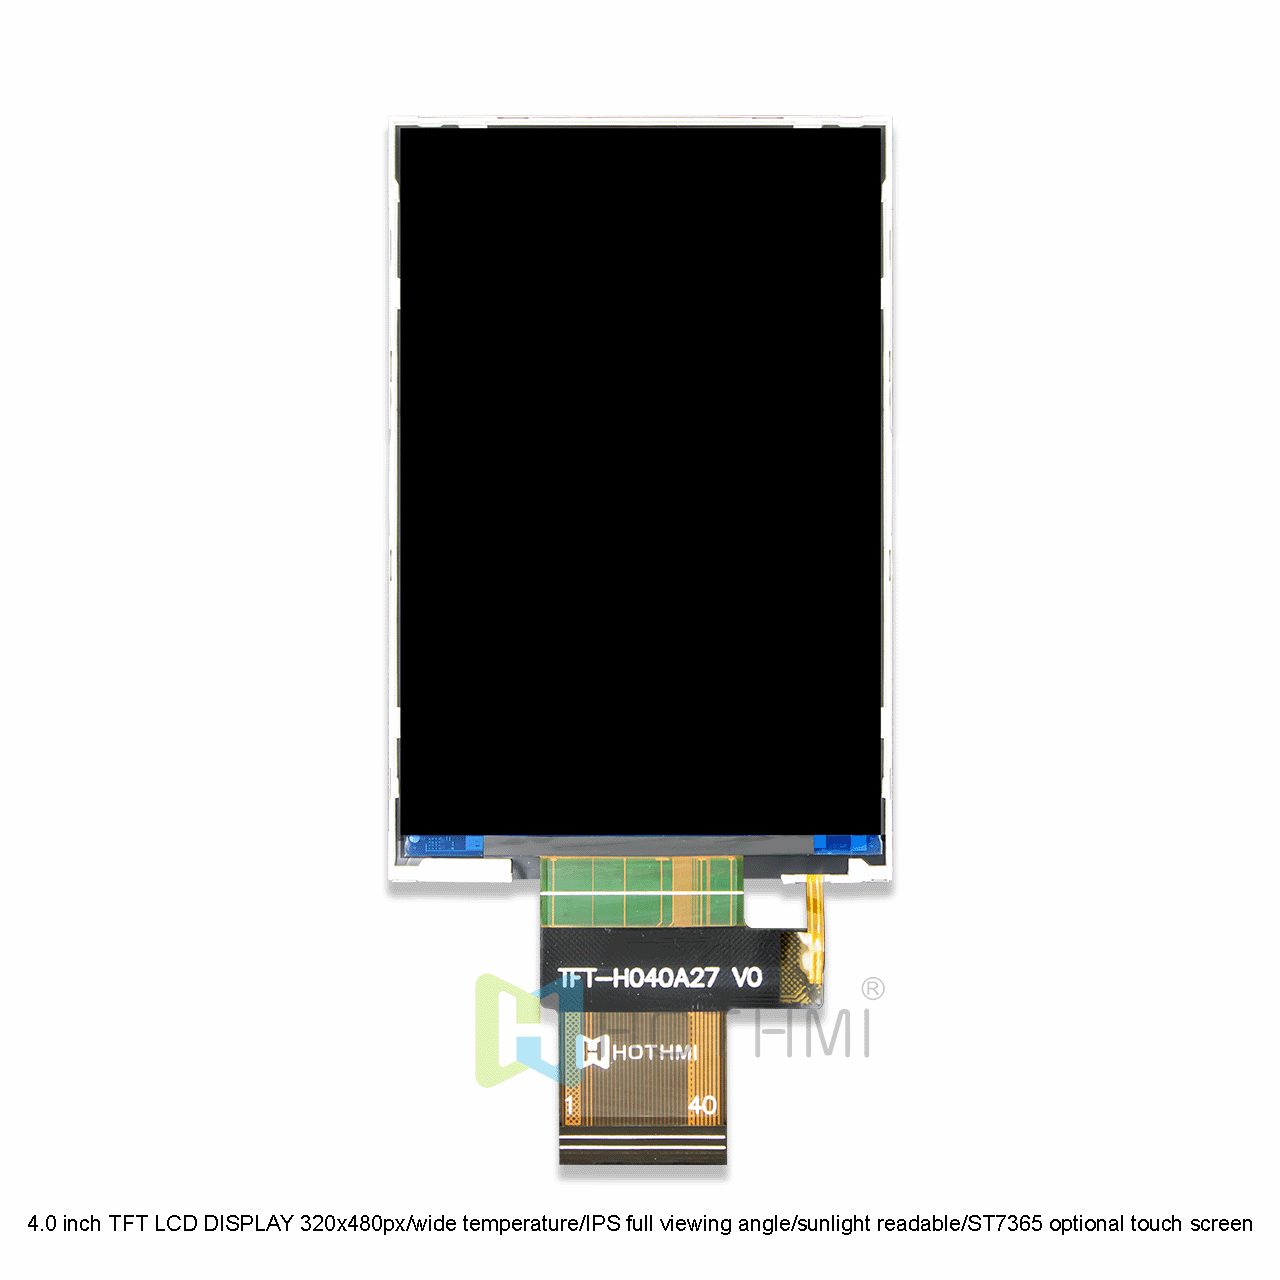 4.0 inch TFT LCD DISPLAY SPI 320x480px/wide temperature/IPS full viewing angle/sunlight readable/ST7365 optional touch screen